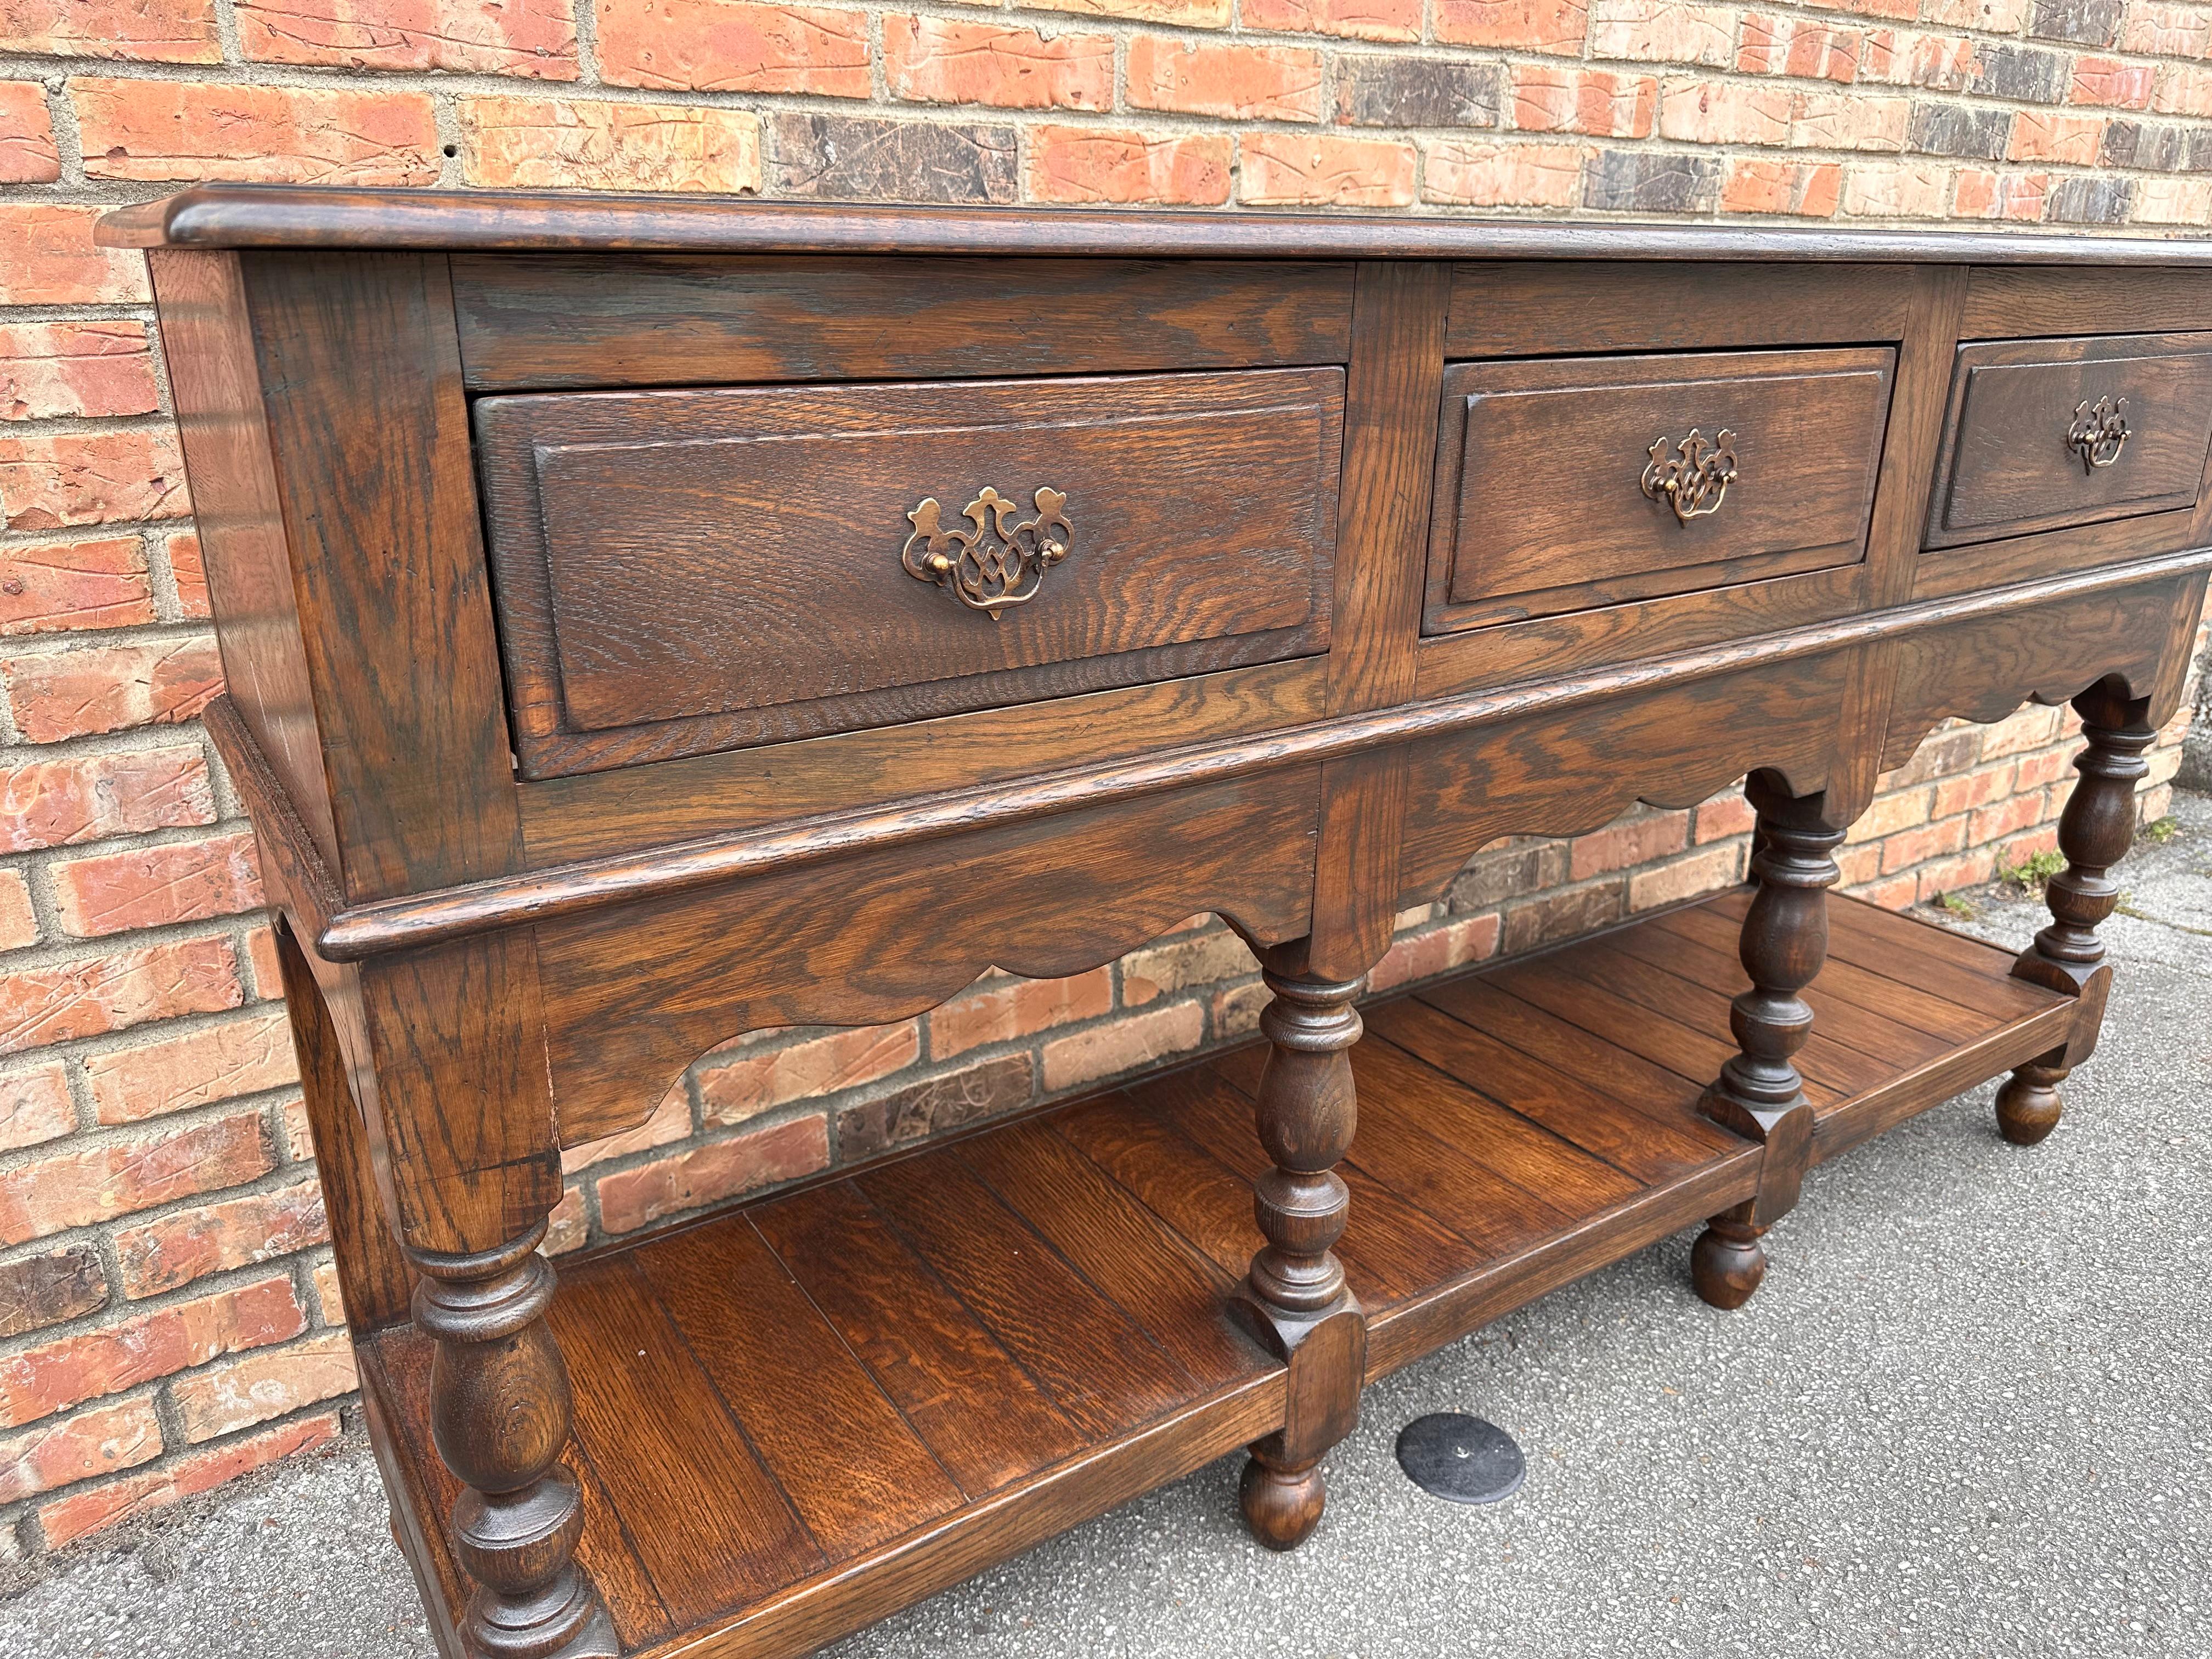 This is a beautiful vintage English piece! Stunning patina that shows up the natural detail of the wood top in a gorgeous shine. The front is simple yet so appealing with the clean lines of the drawers giving way to curved turned legs meeting the